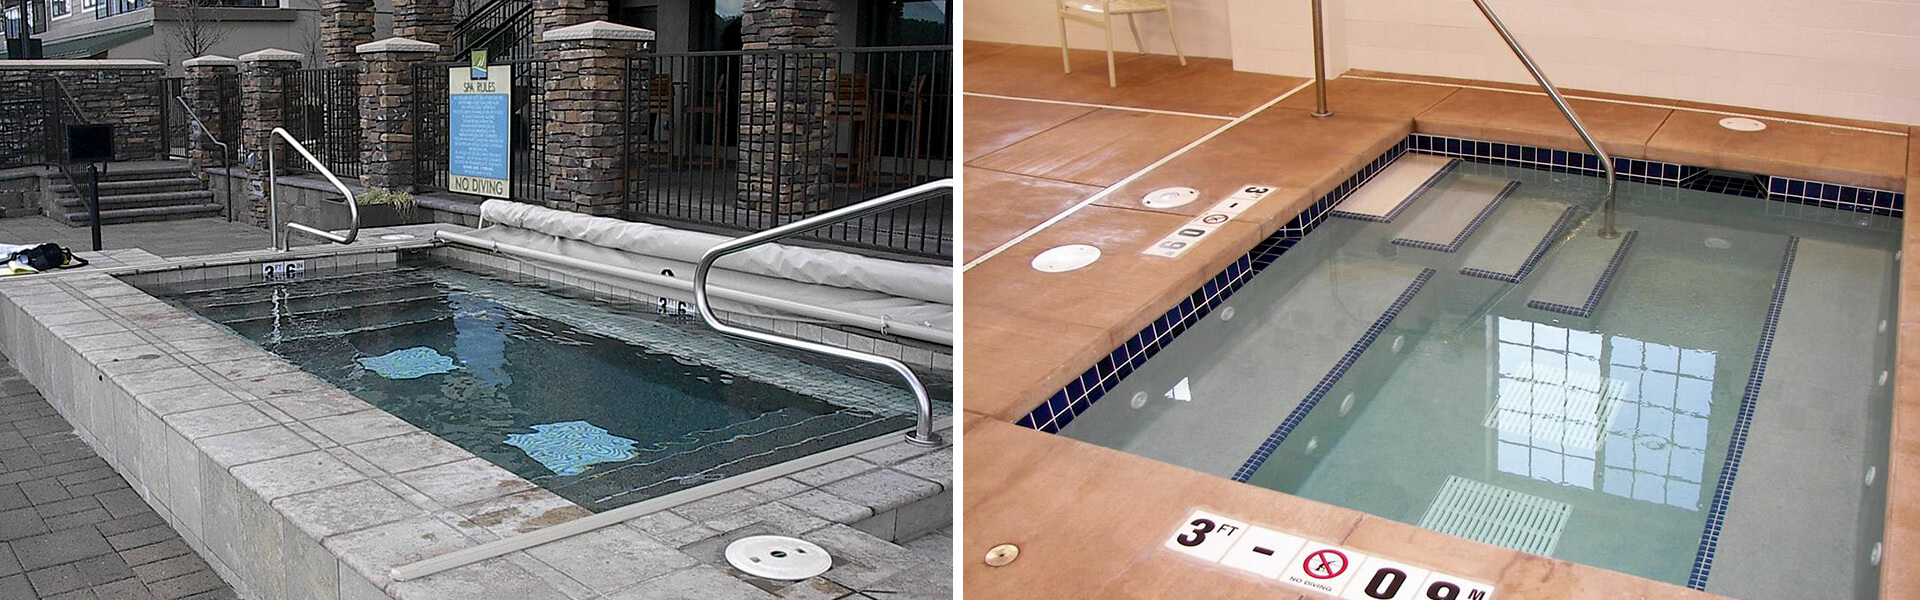 Commercial Hot Tubs